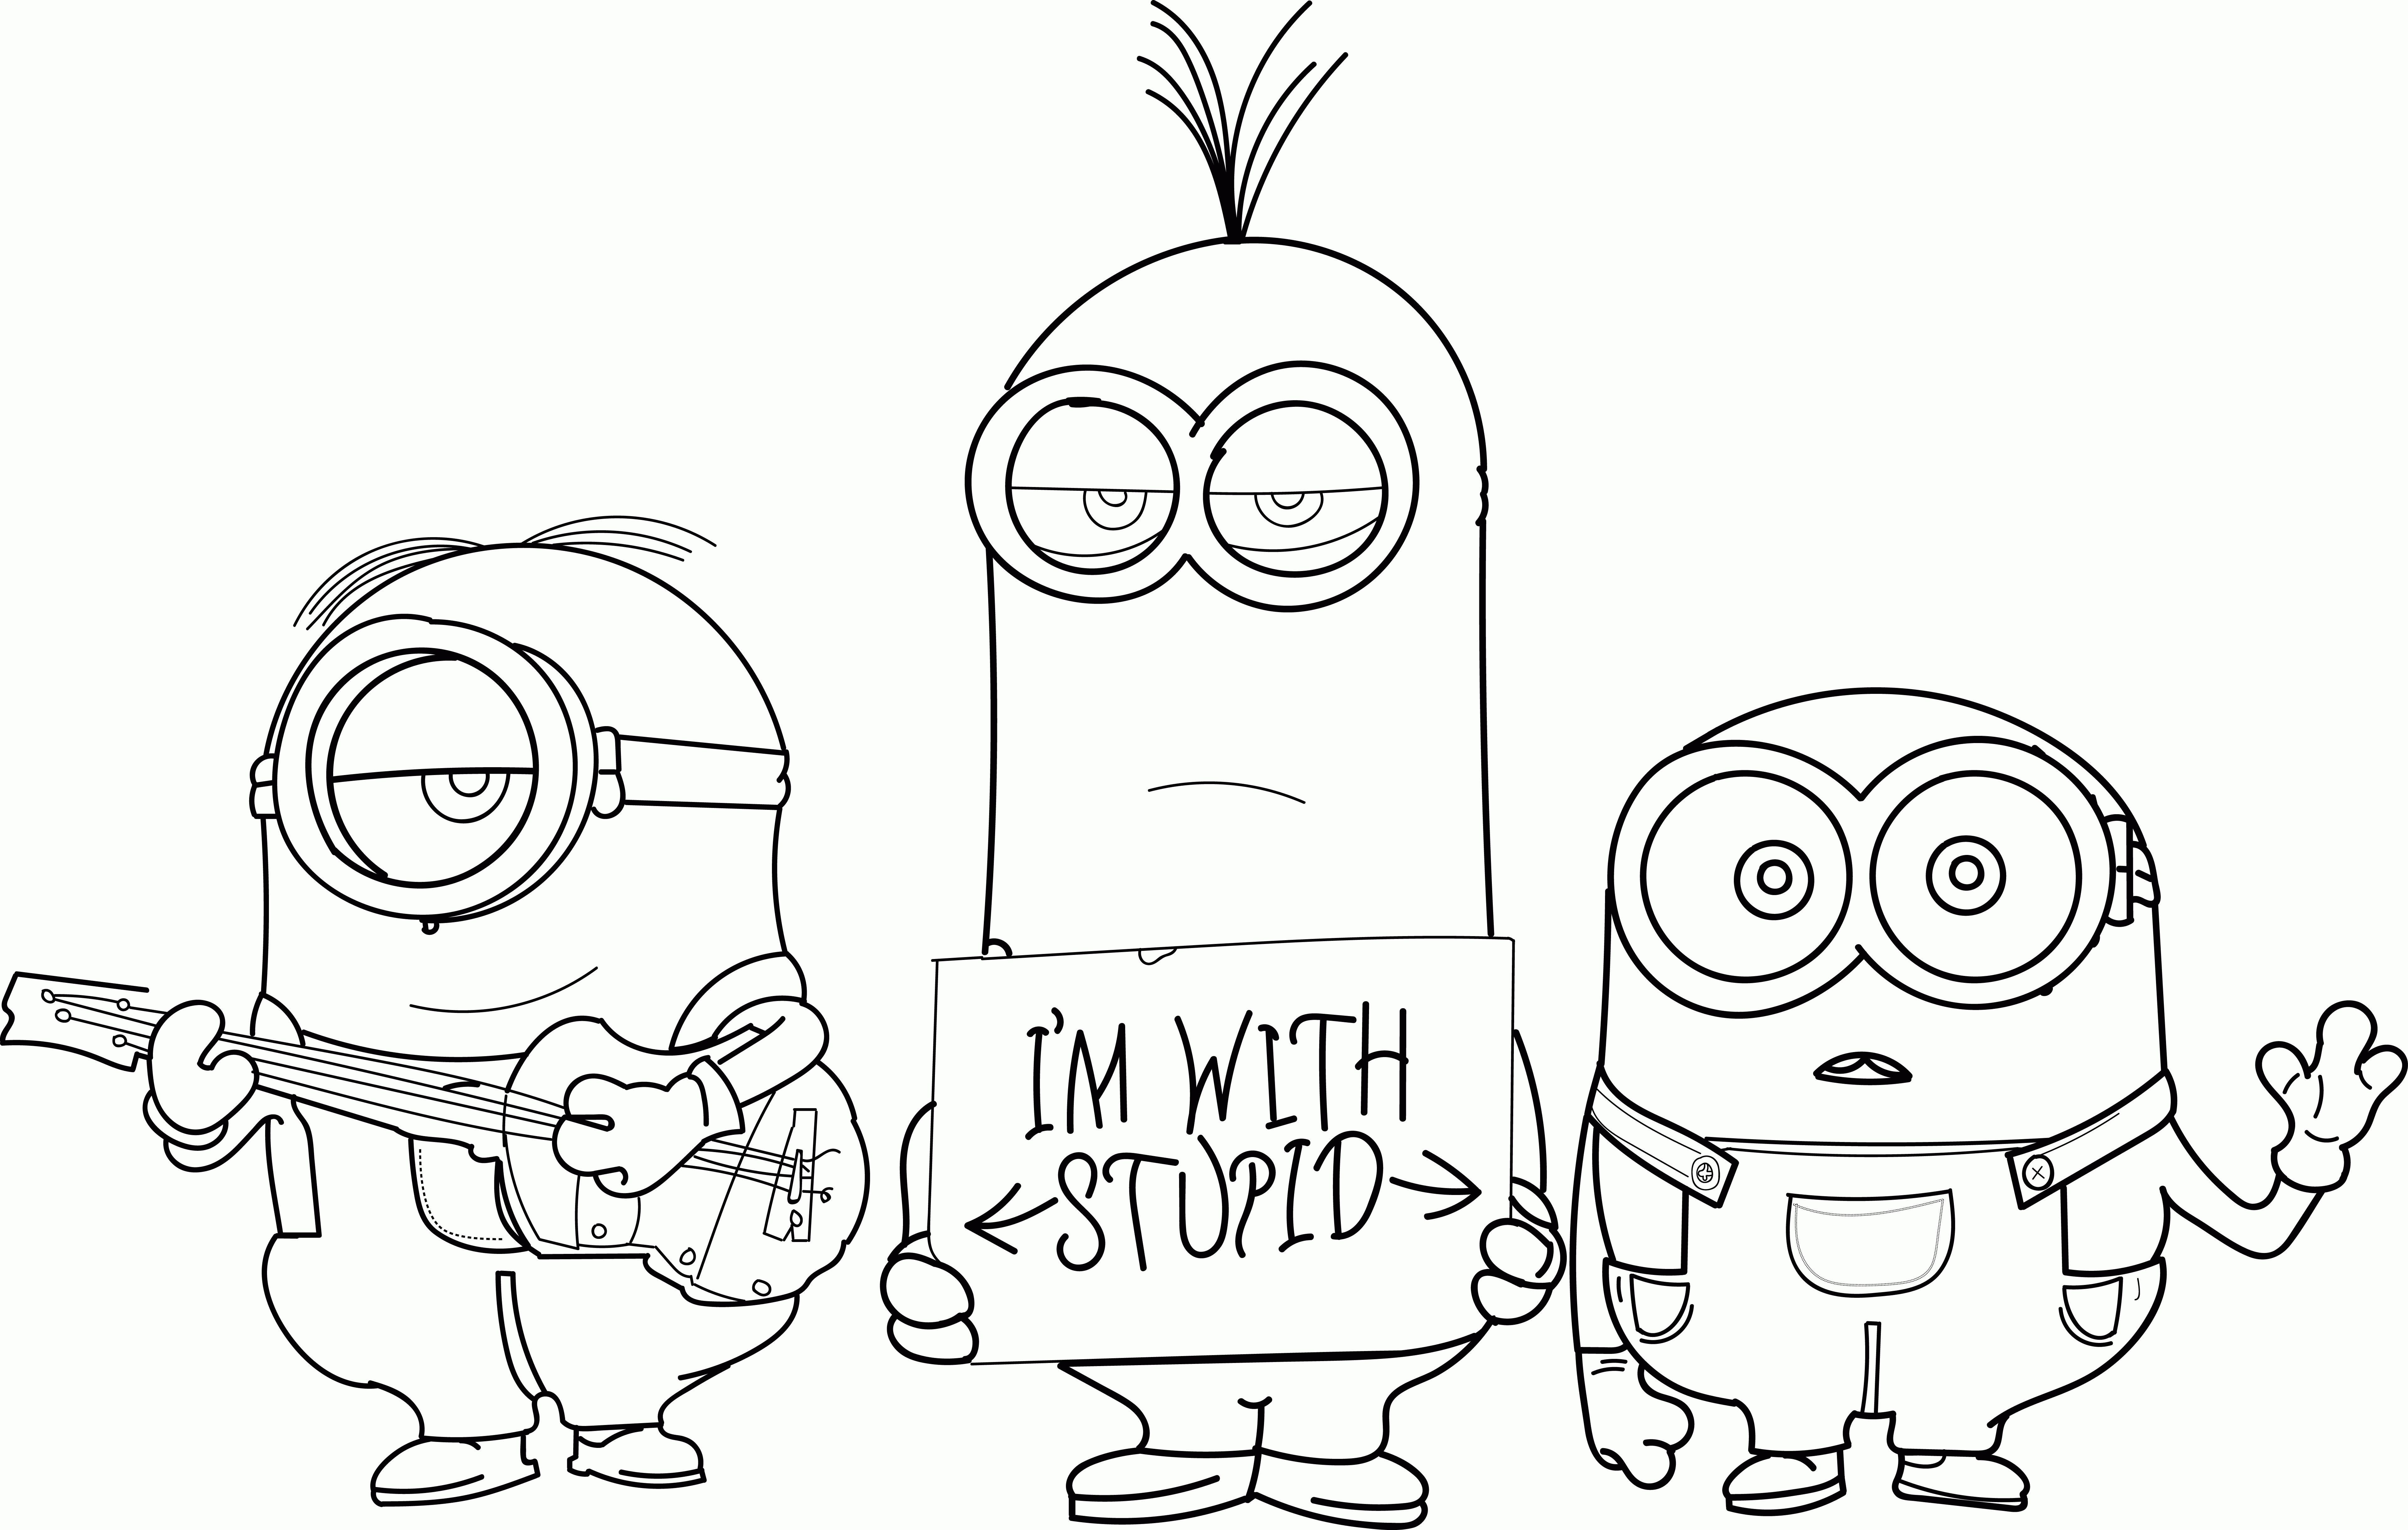 Minions Coloring Pages Wecoloringpage Minion Coloring Pages Images